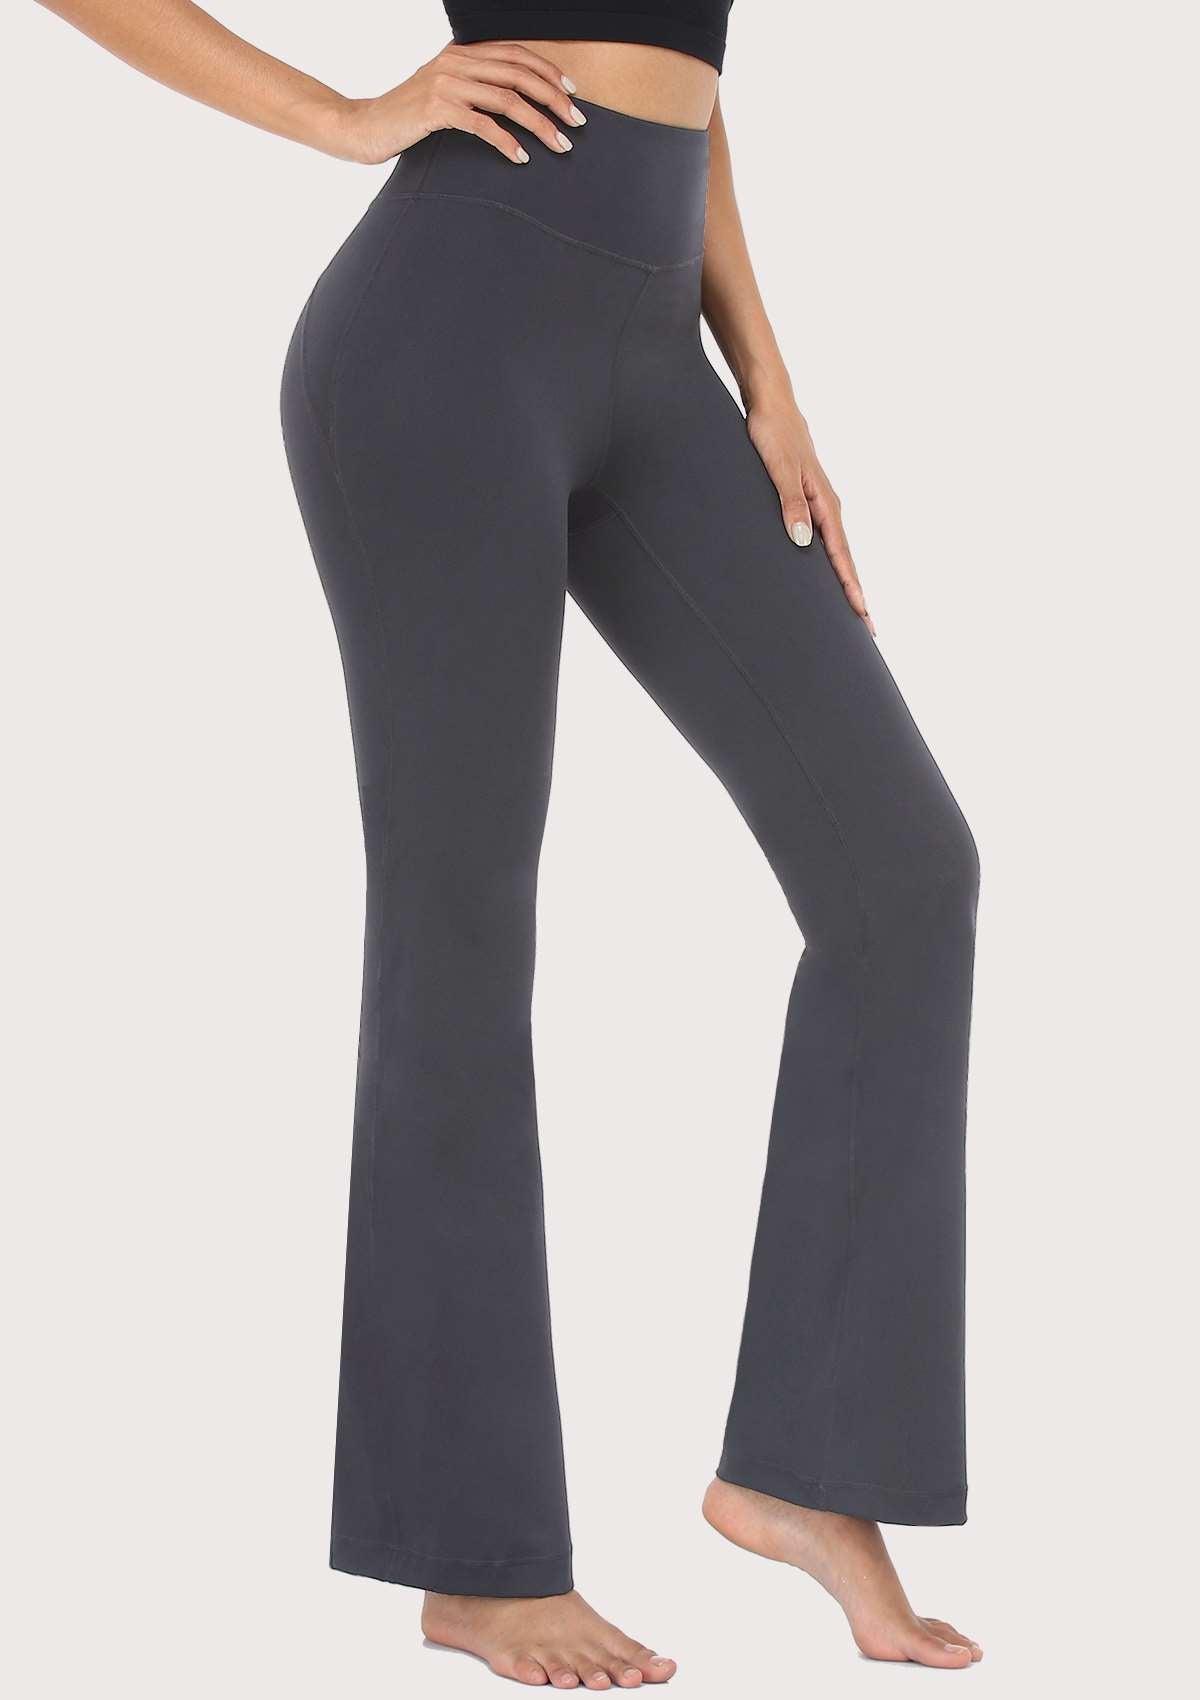 SONGFUL Smooth High Waisted Bootcut Yoga Sports Pants - S / Dark Grey